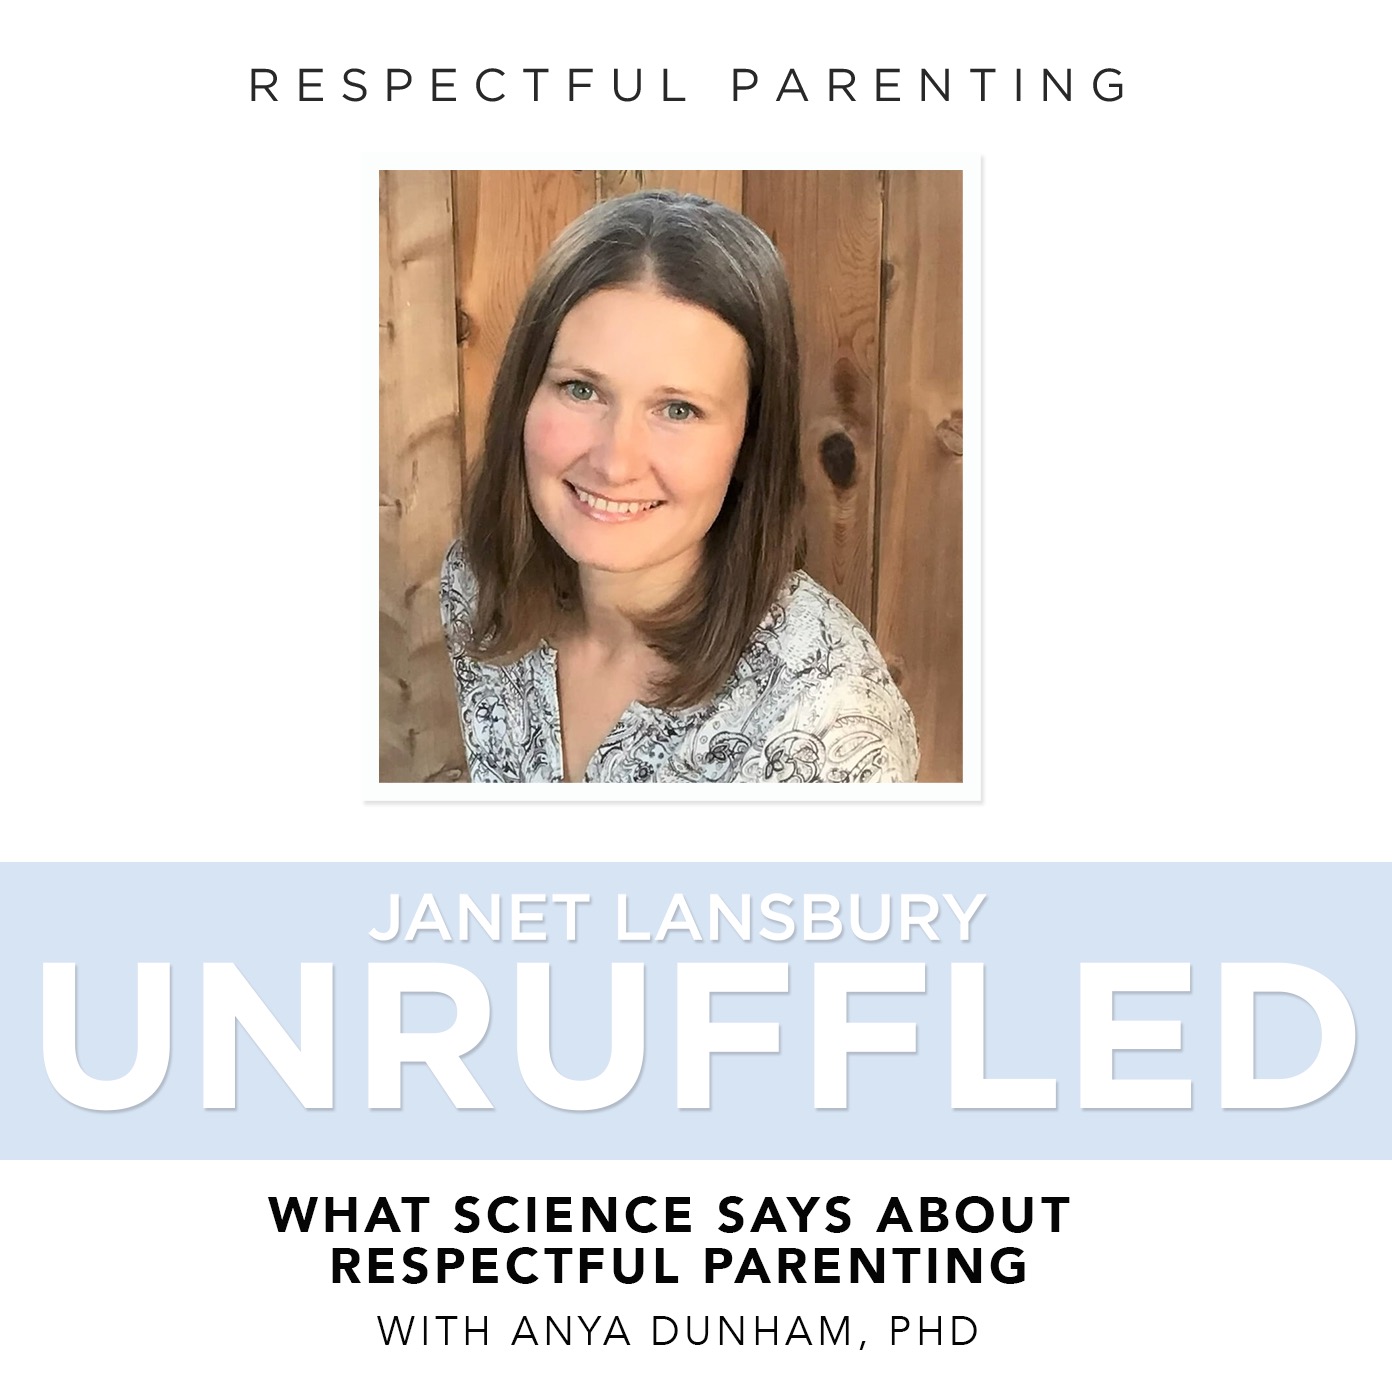 What Science Says About Respectful Parenting (with Anya Dunham, PhD)